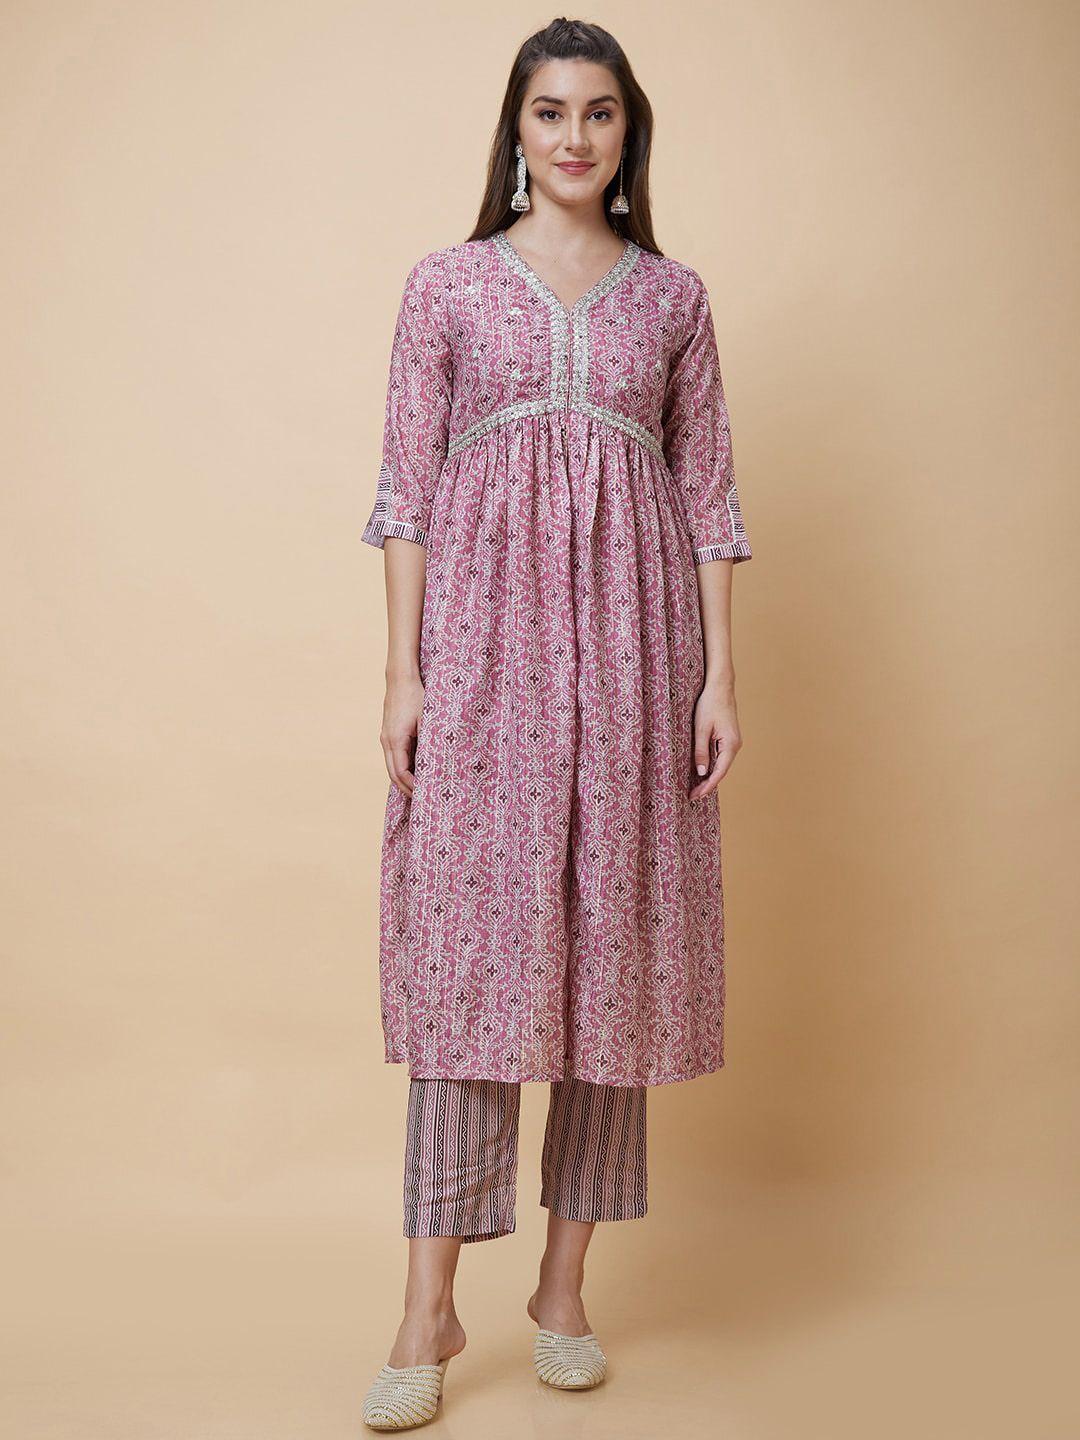 Globus Pink Ethnic Motifs Printed Sequinned High Slit A-Line Kurta With Trousers